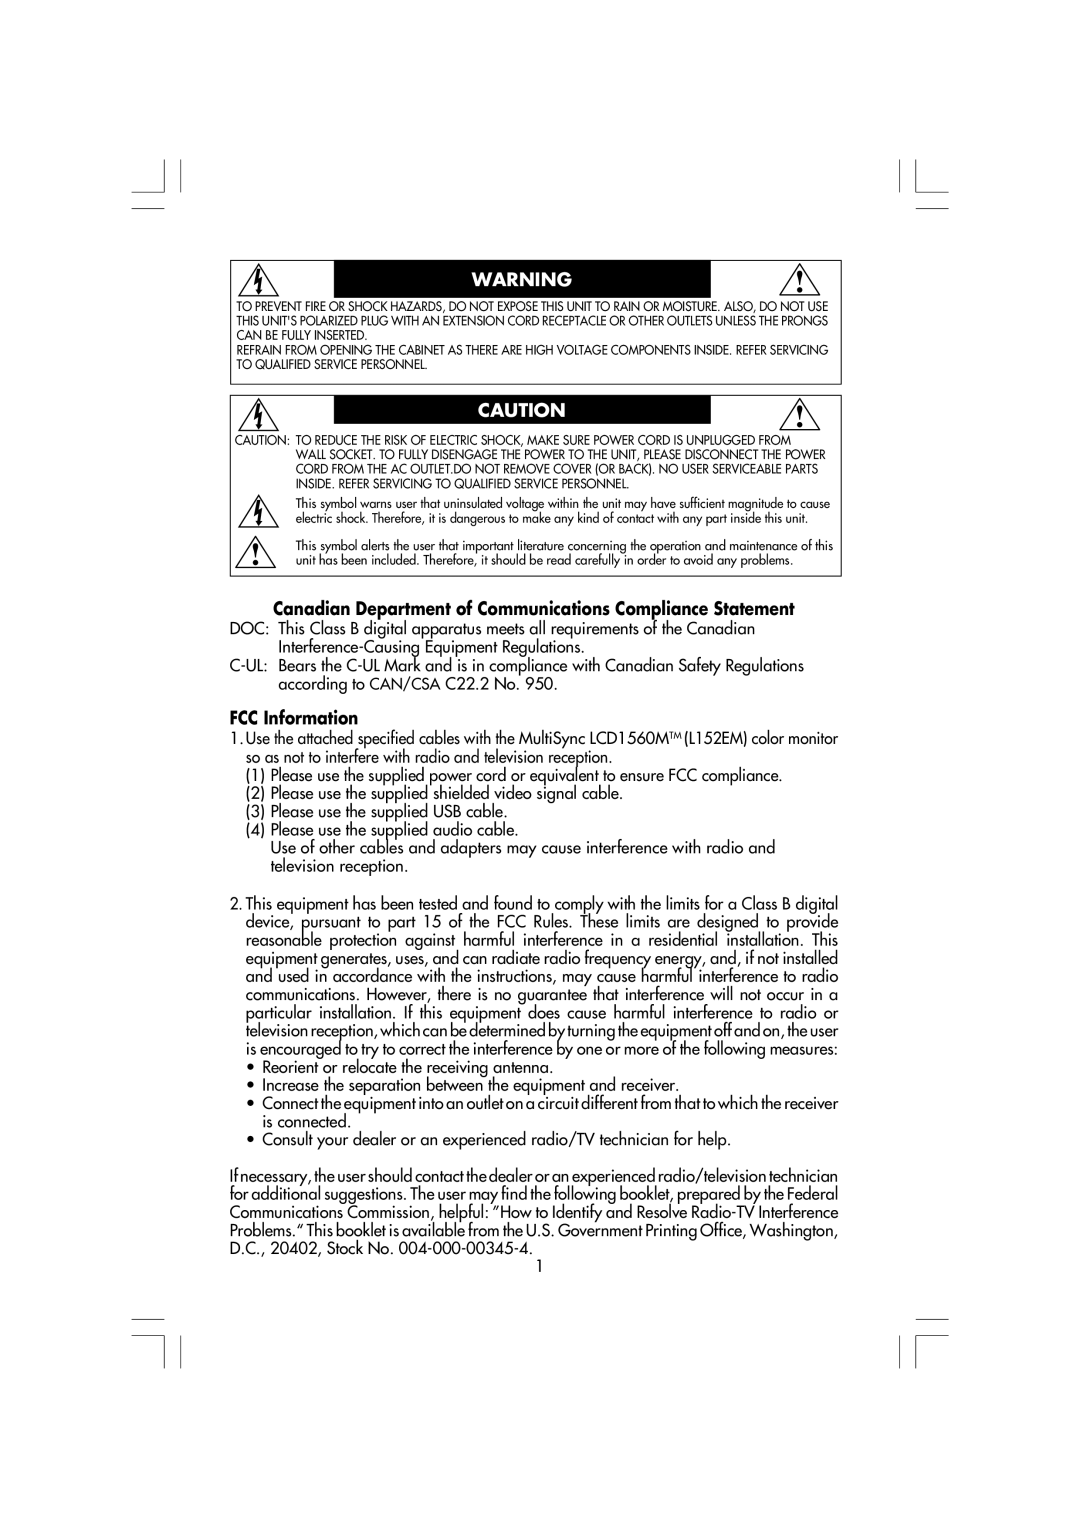 Mitsubishi Electronics LCD1560M manual Canadian Department of Communications Compliance Statement, FCC Information 